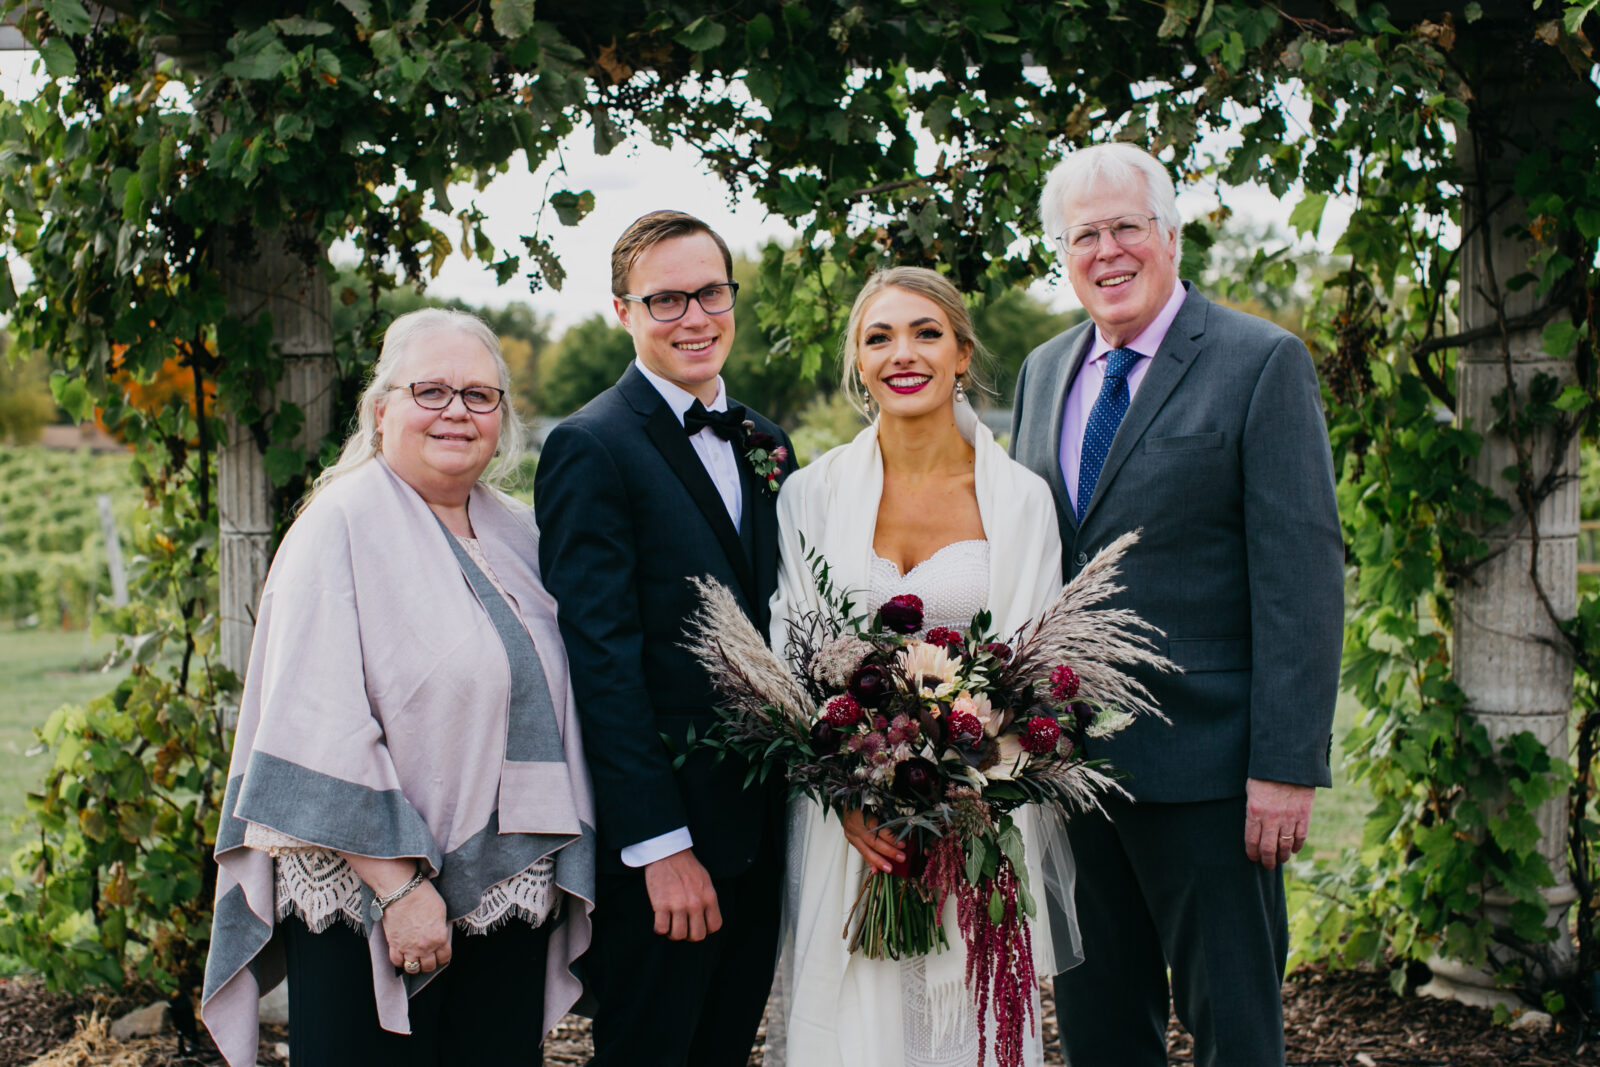 Family photos with the bride and groom during their wedding day